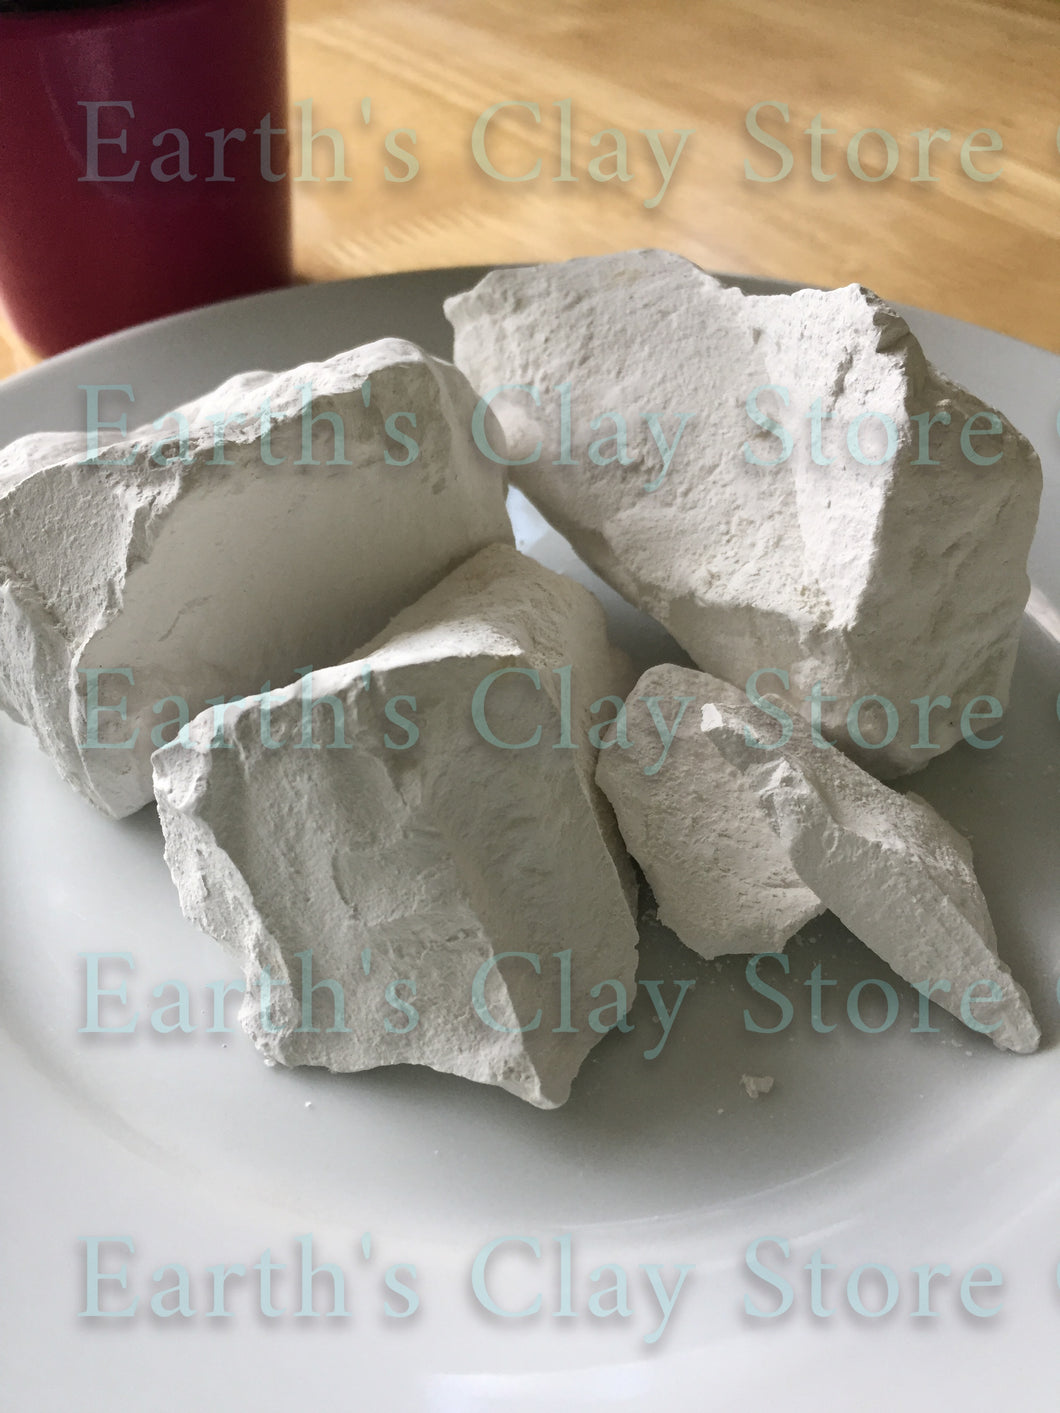 Buy The Edible Clay + Edible Chalk. 4 Types of Clay + 4 Types of